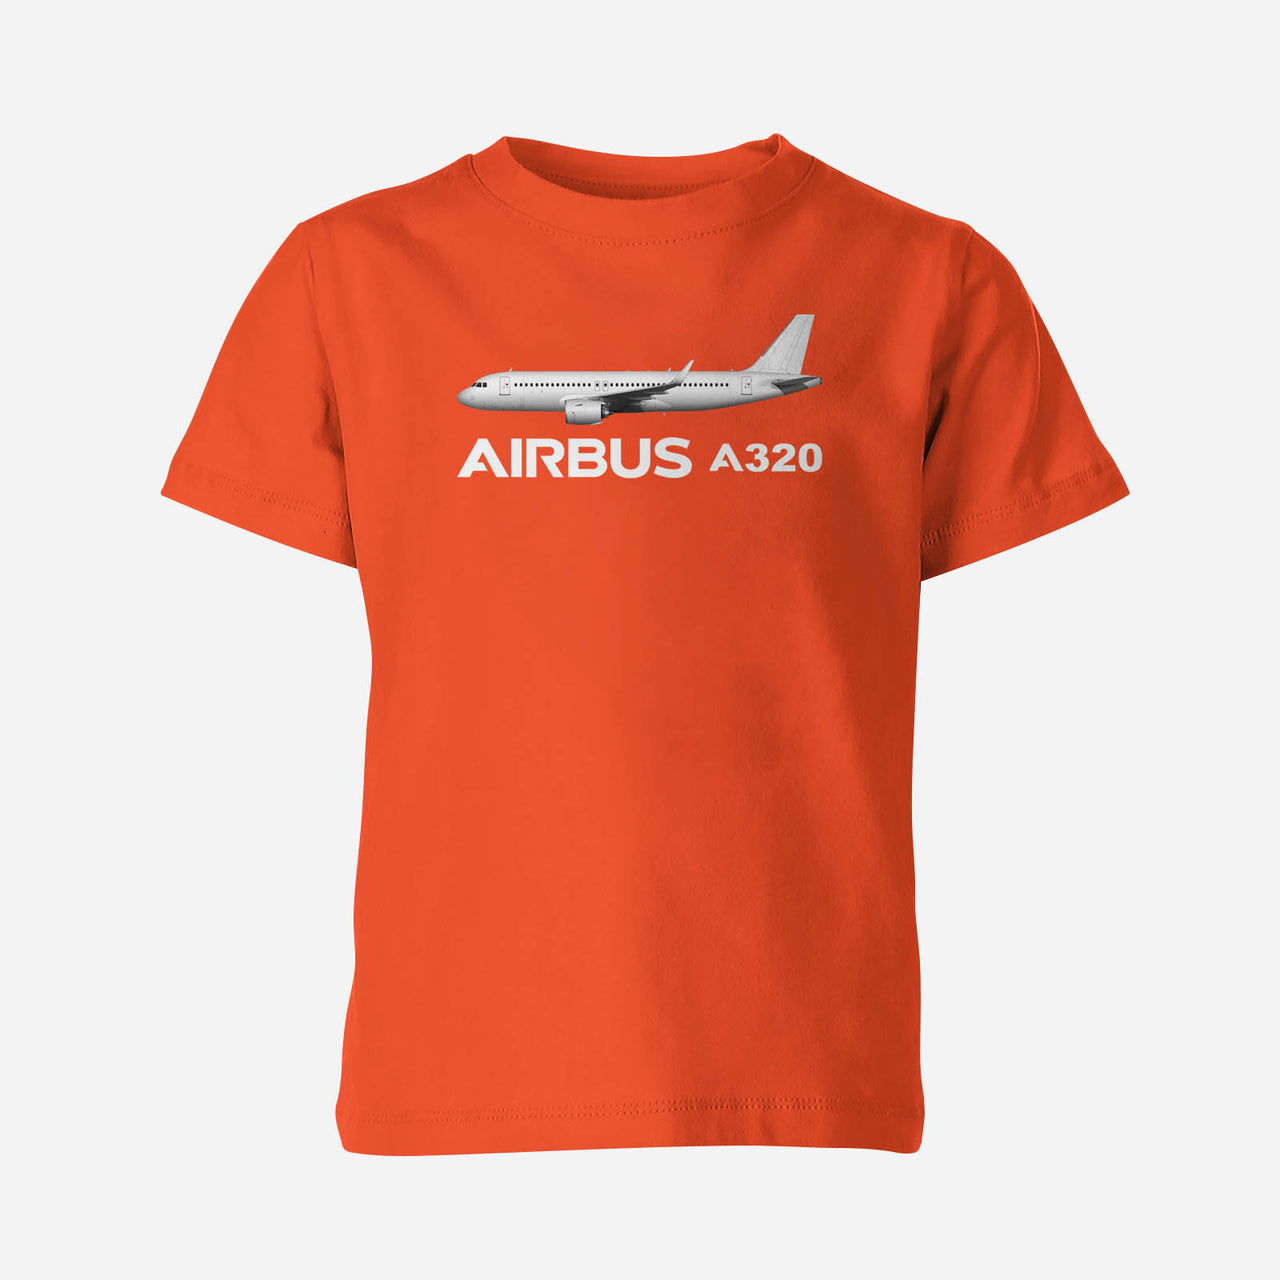 The Airbus A320 Designed Children T-Shirts